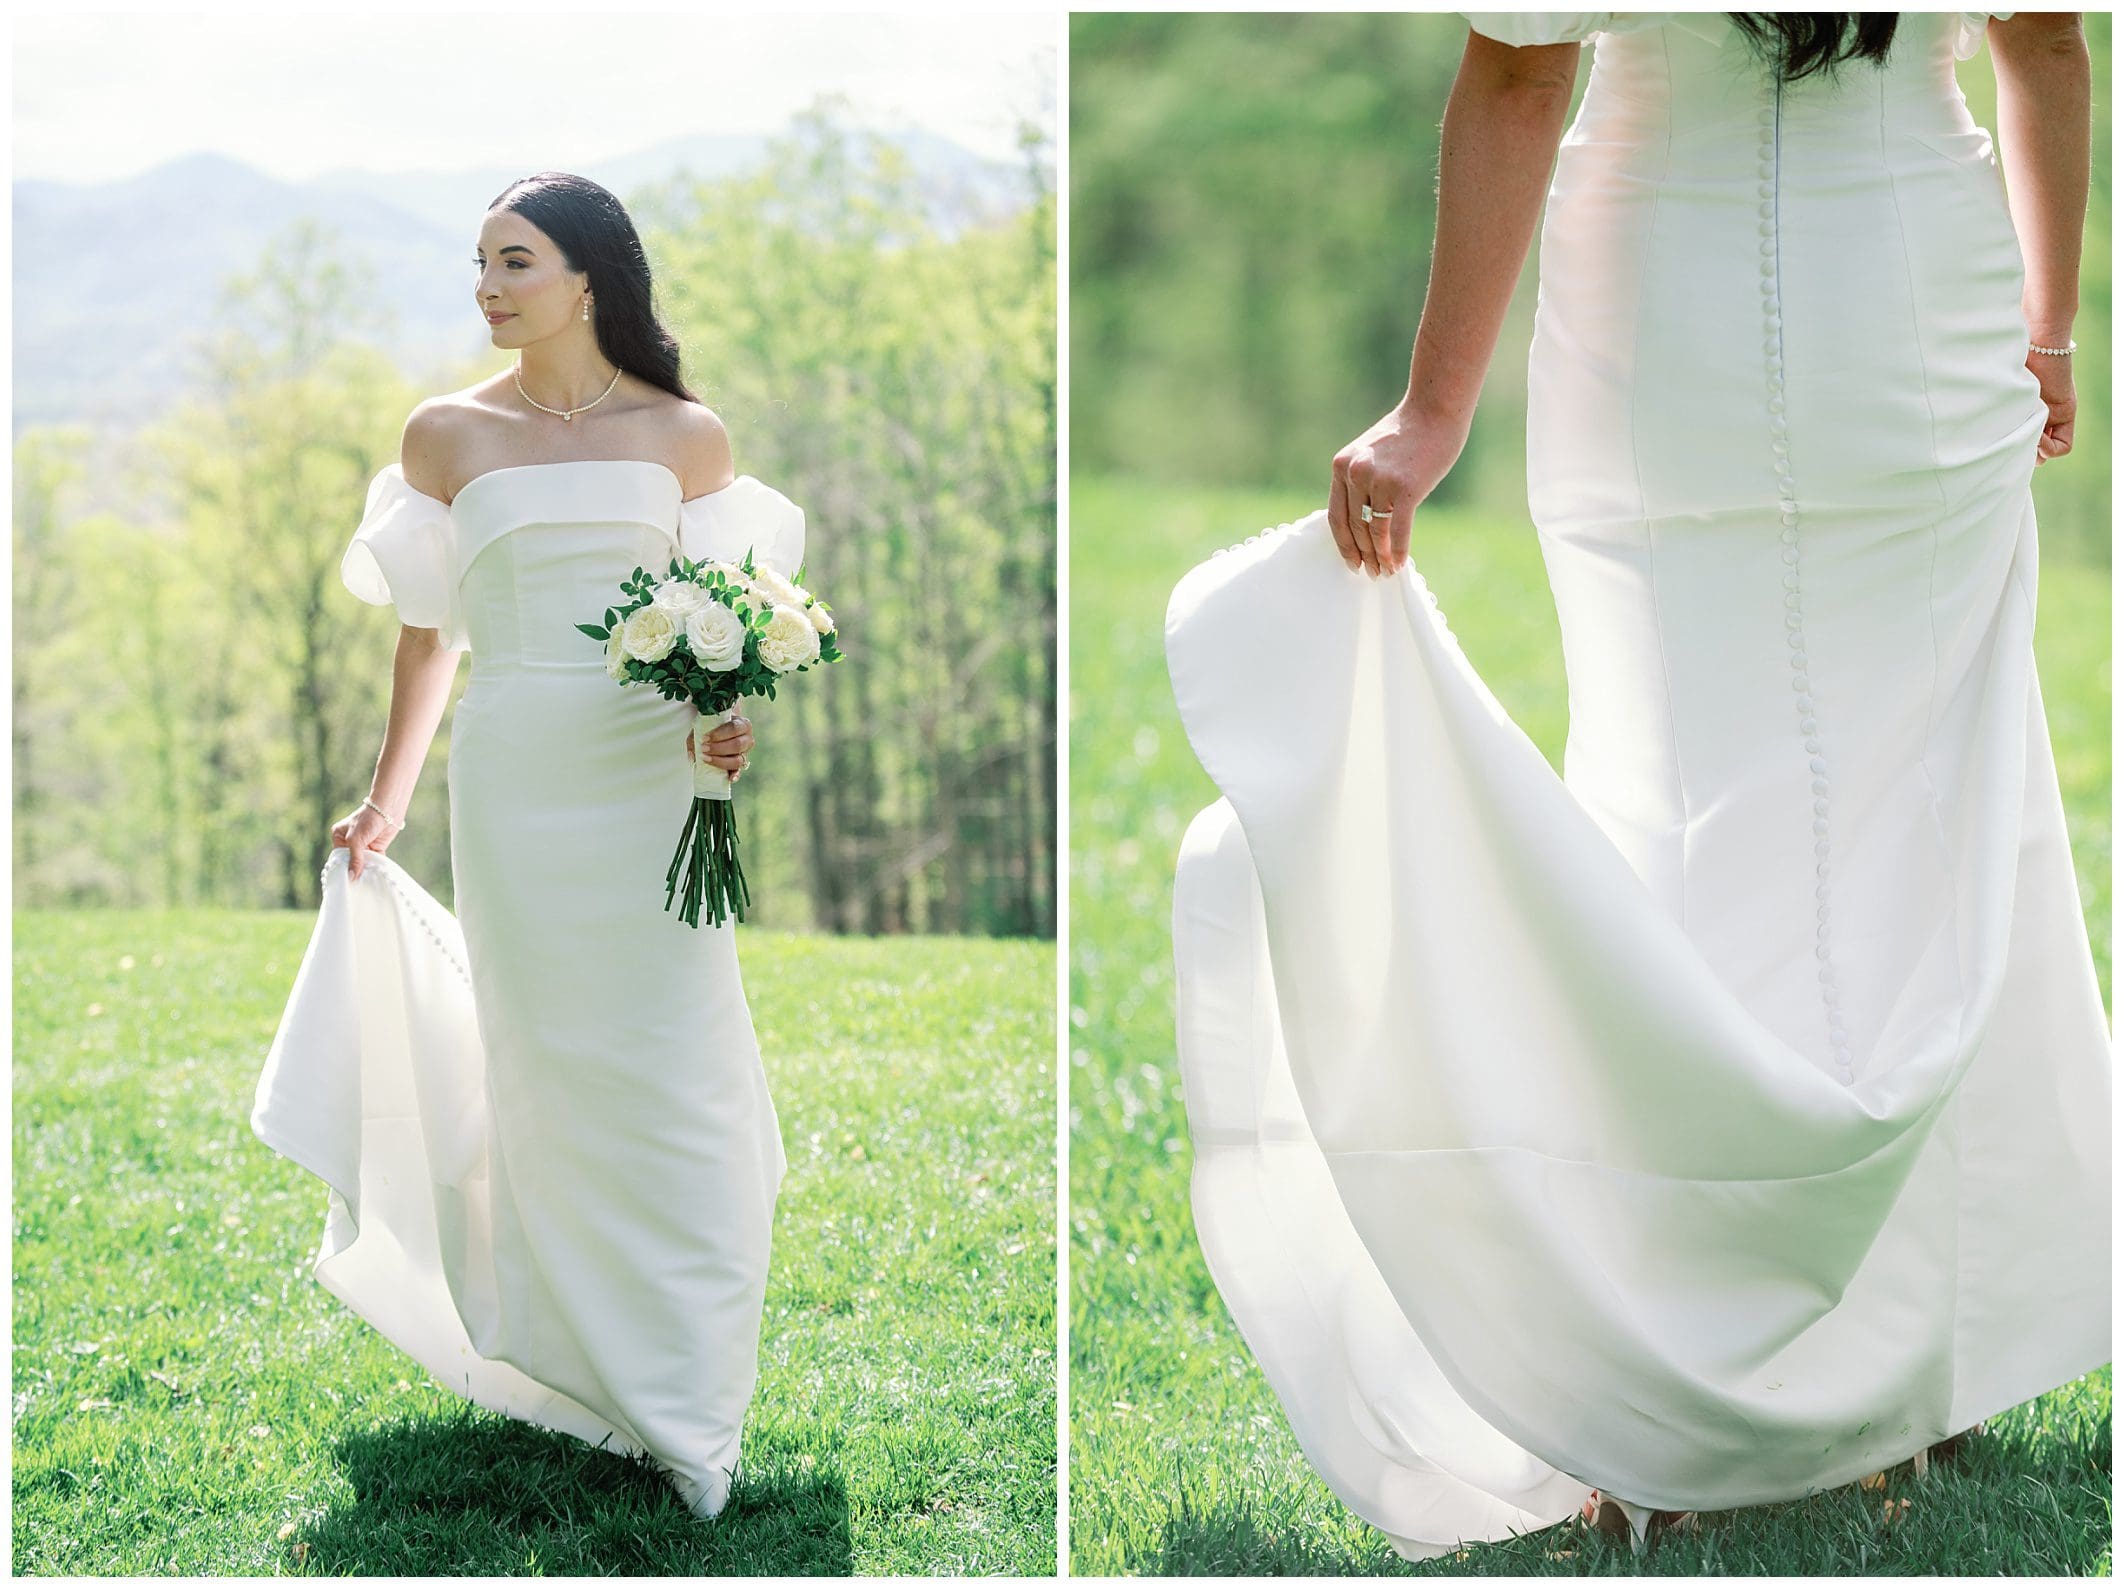 A bridewhite gown holding a bouquet, with a scenic mountain backdrop in the first image and a close-up of the gown’s details in the second image.